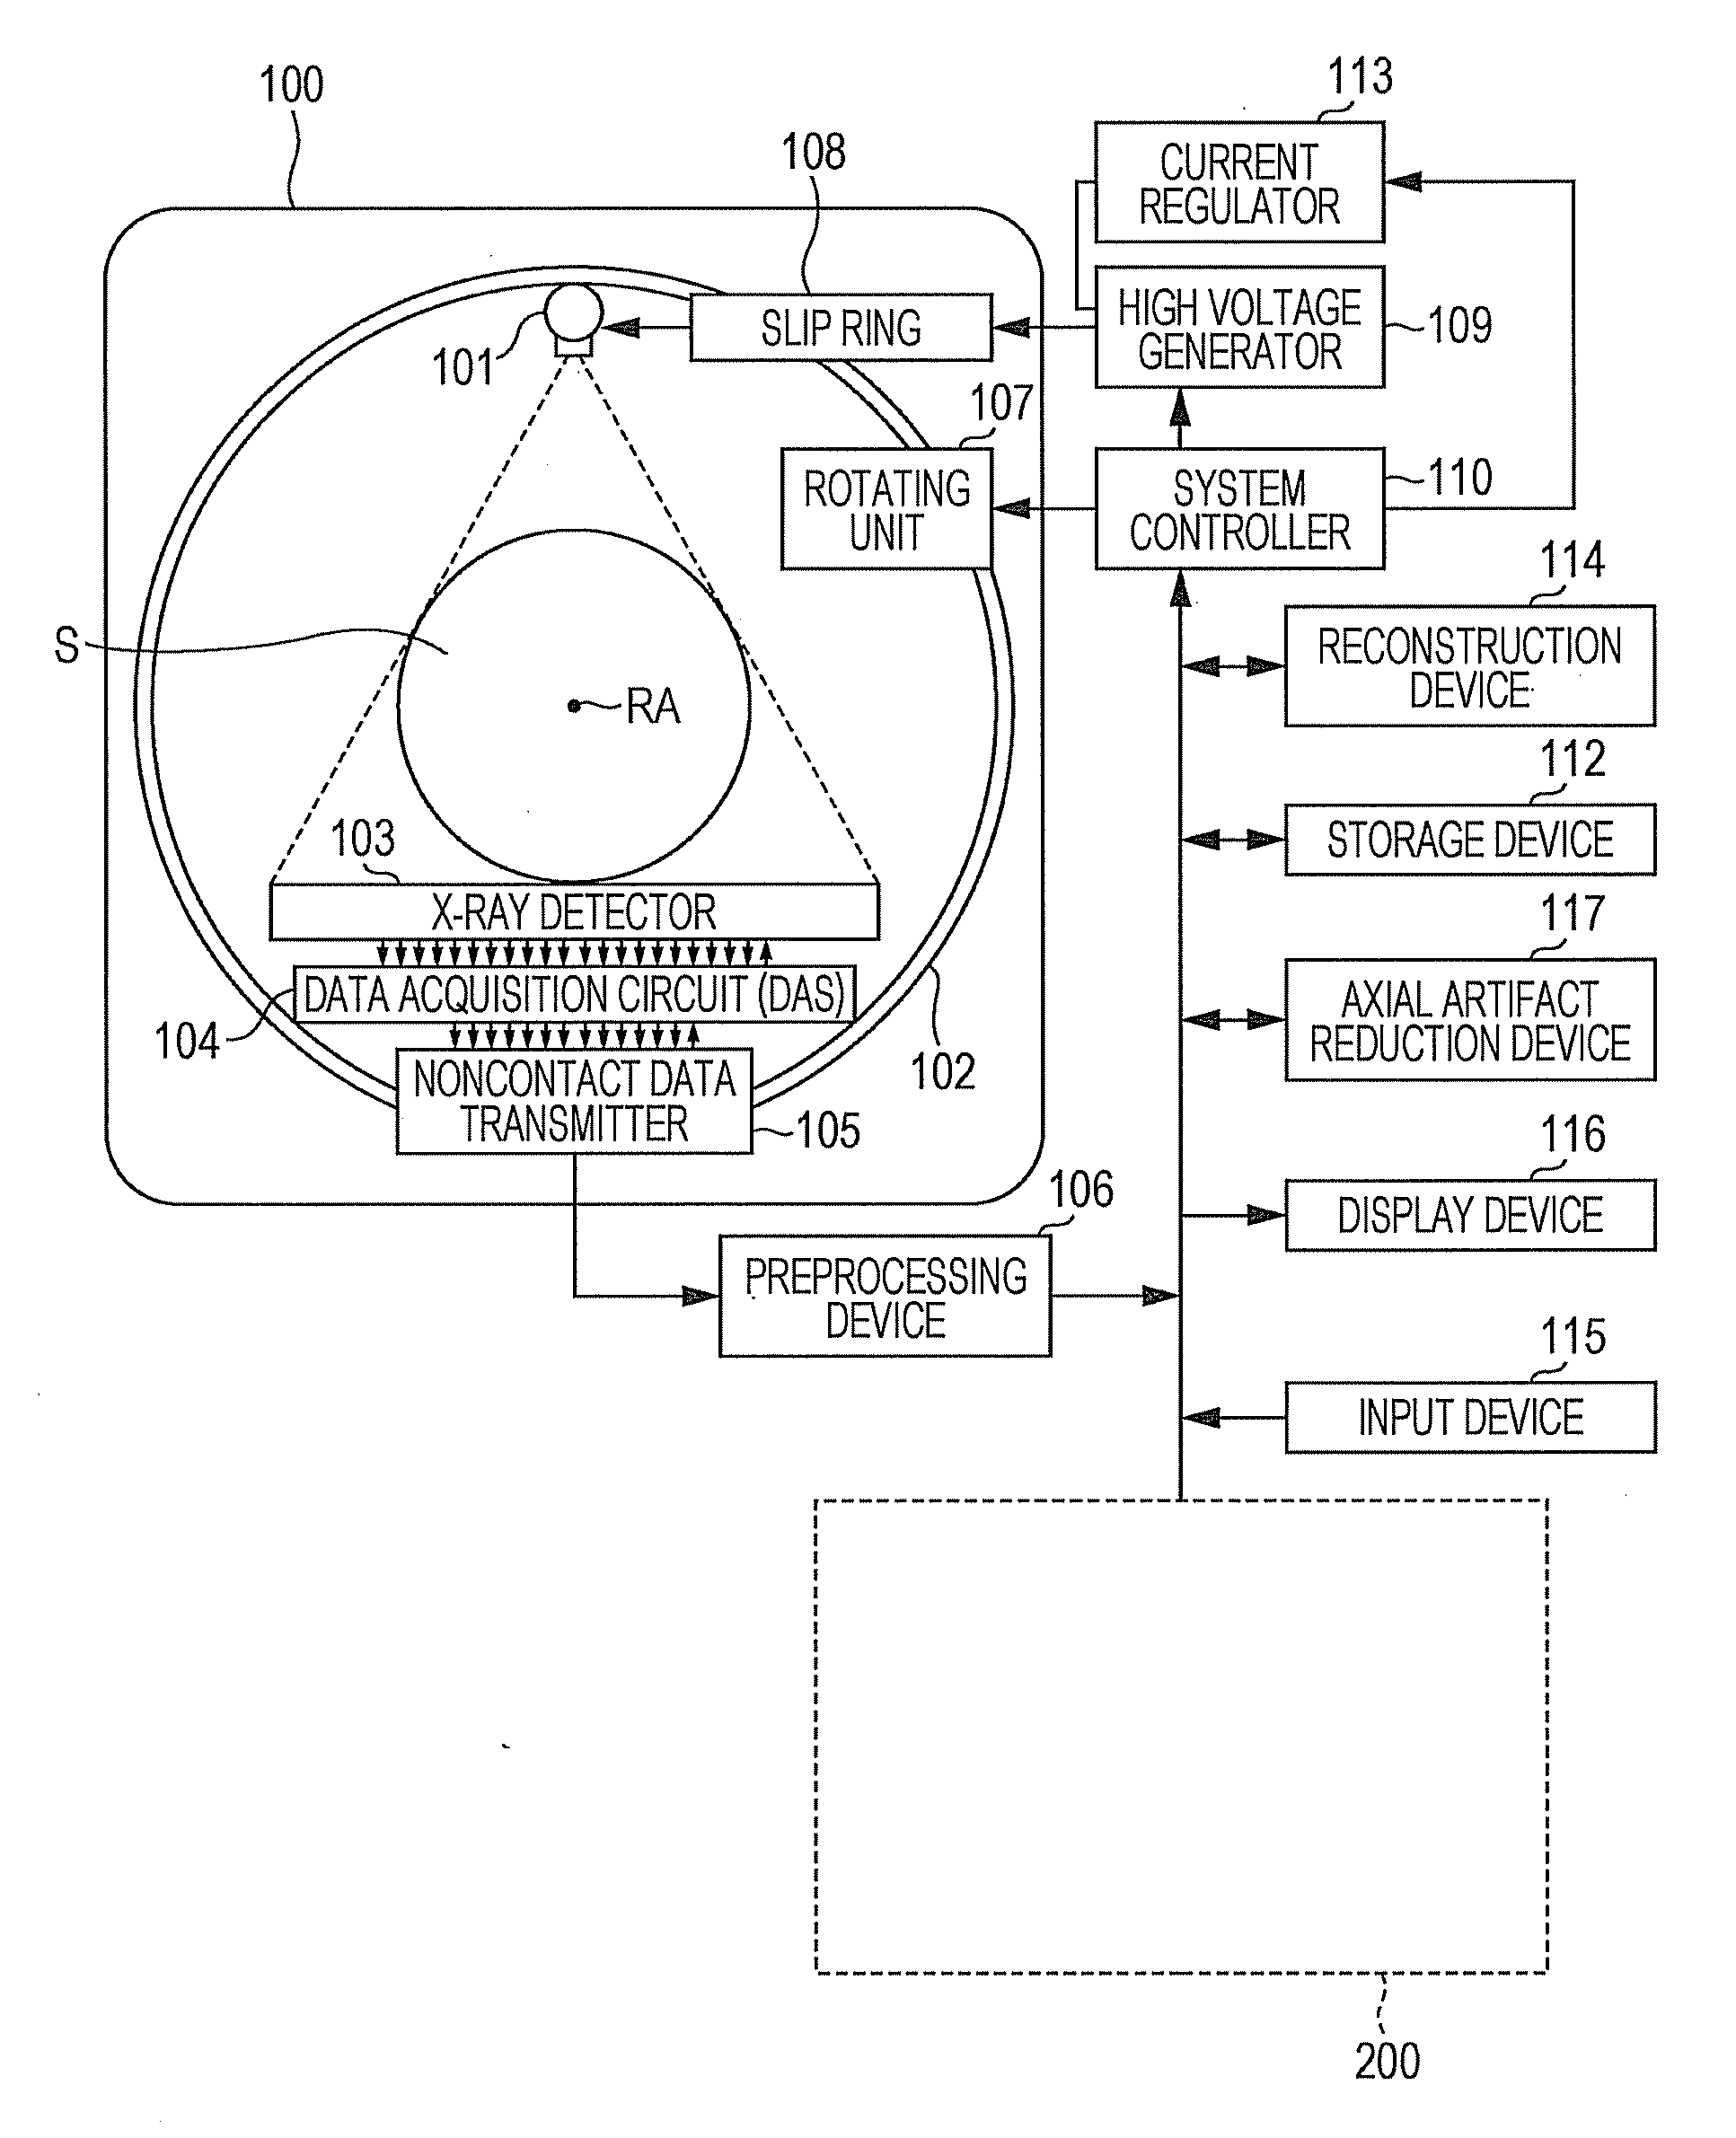 Method and system for expanding axial coverage in iterative reconstruction in computer tomography (CT)